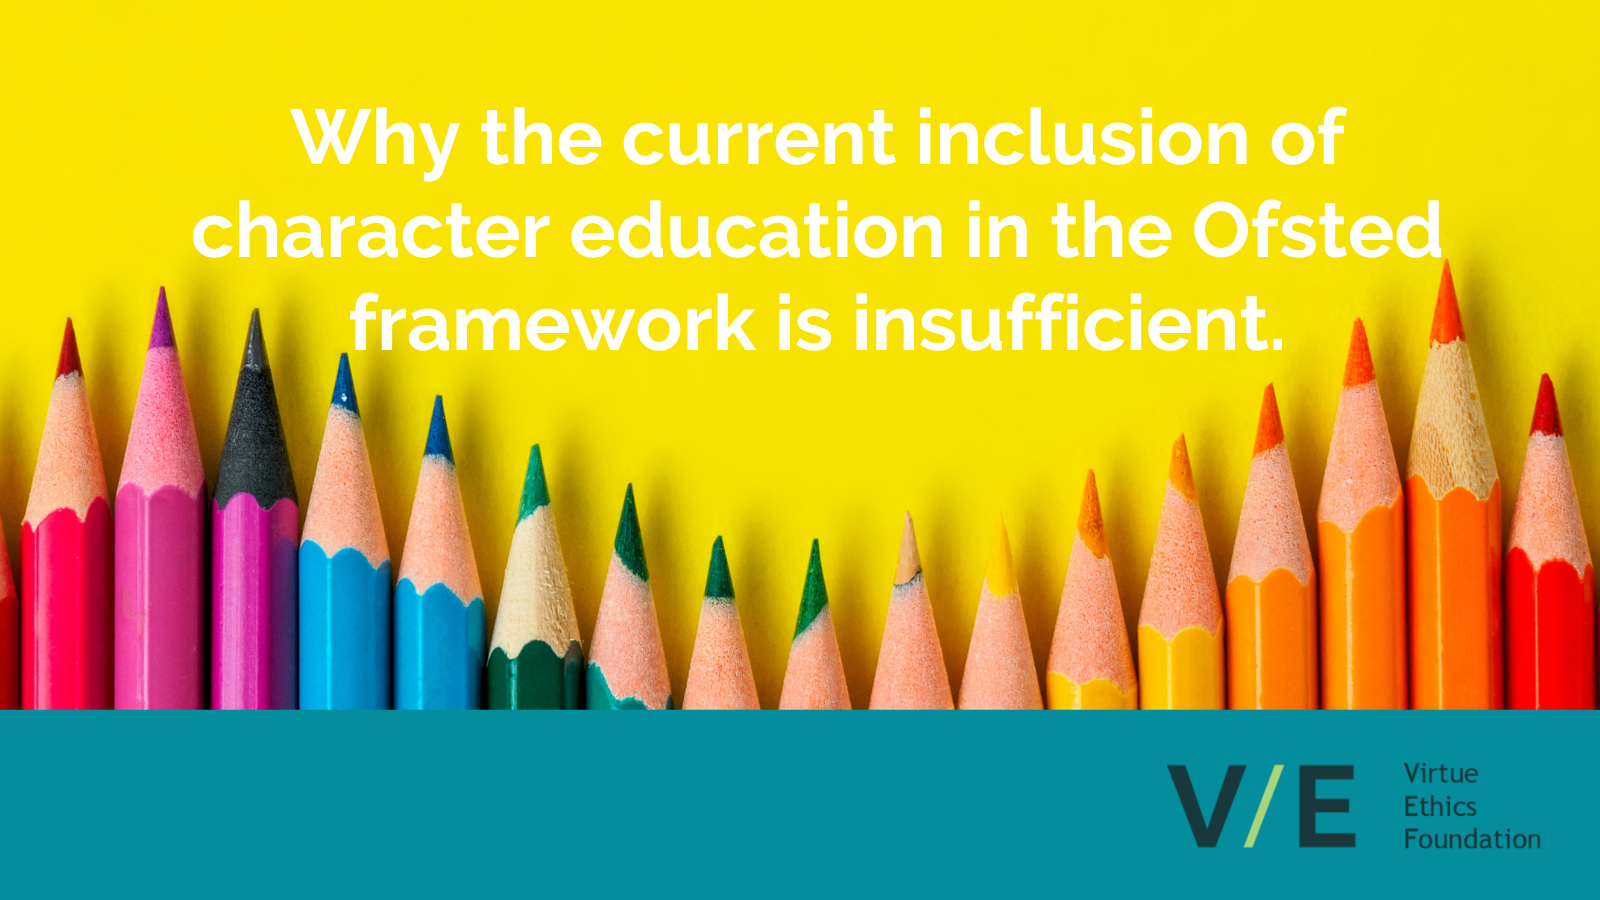 Why the current inclusion of character education in the Ofsted framework is insufficient